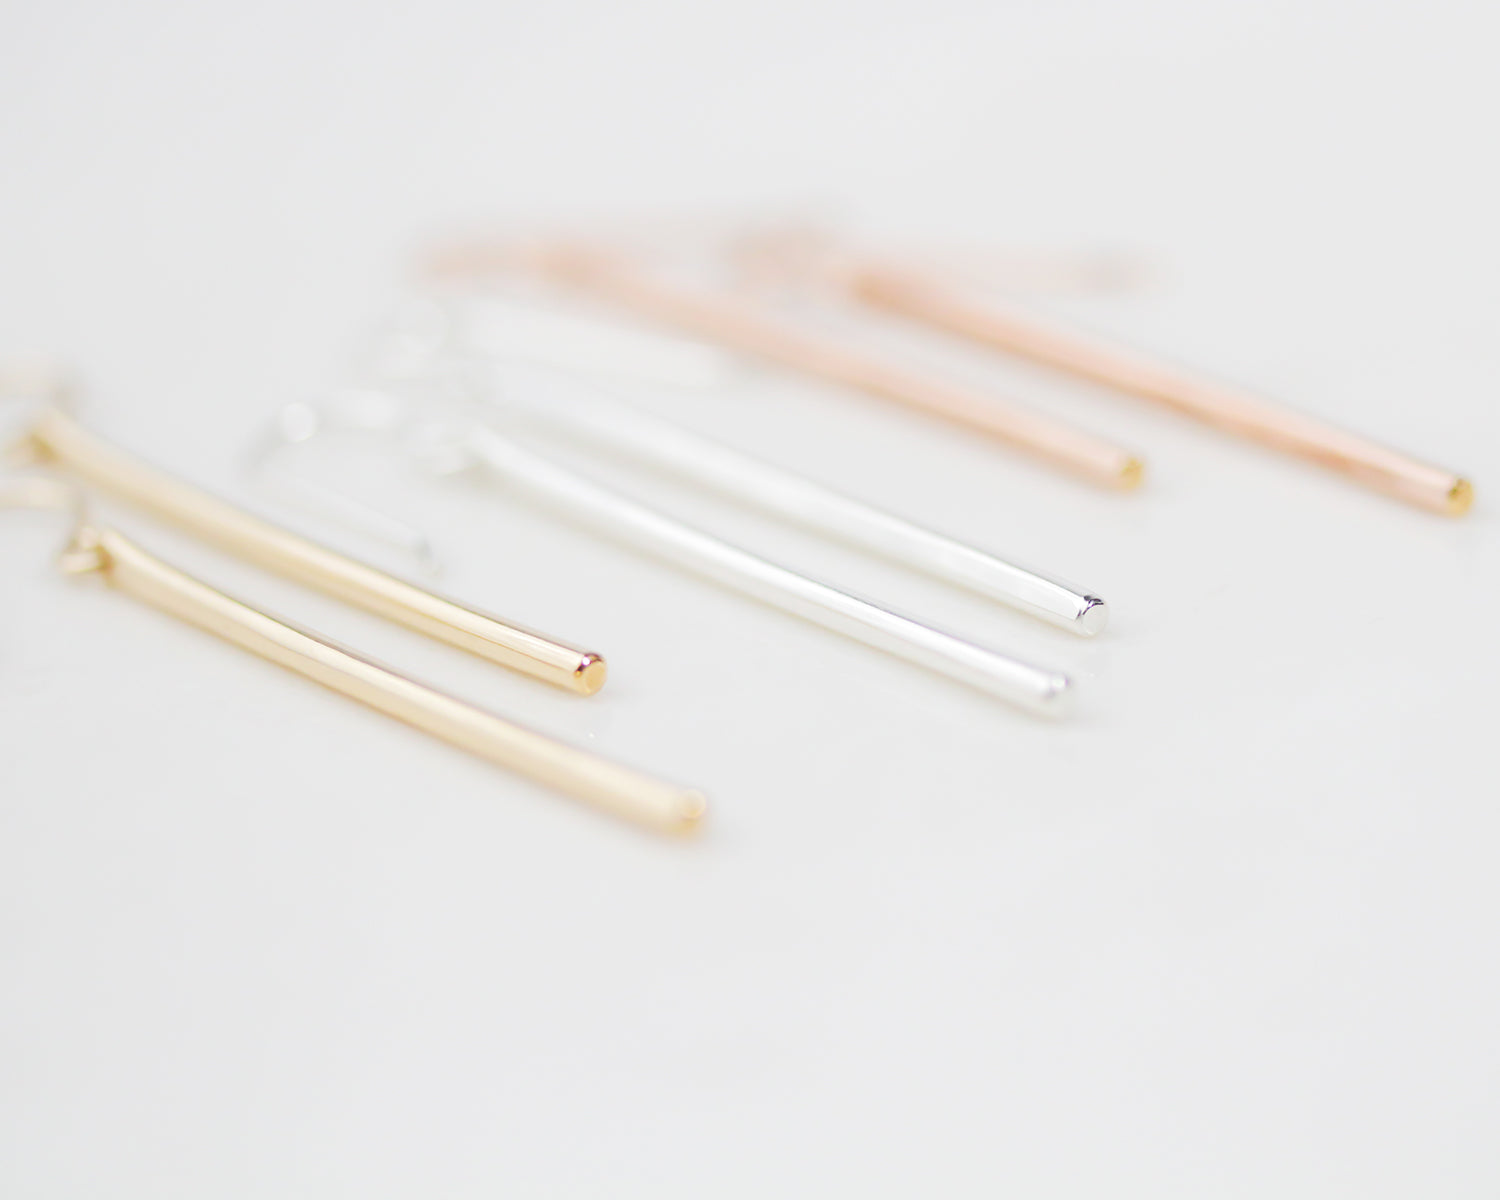 Side view of our long, slender and sleek earrings showcases the fine quality of the design. Showing all three fine metal selects and the precision by which they were made by hand.